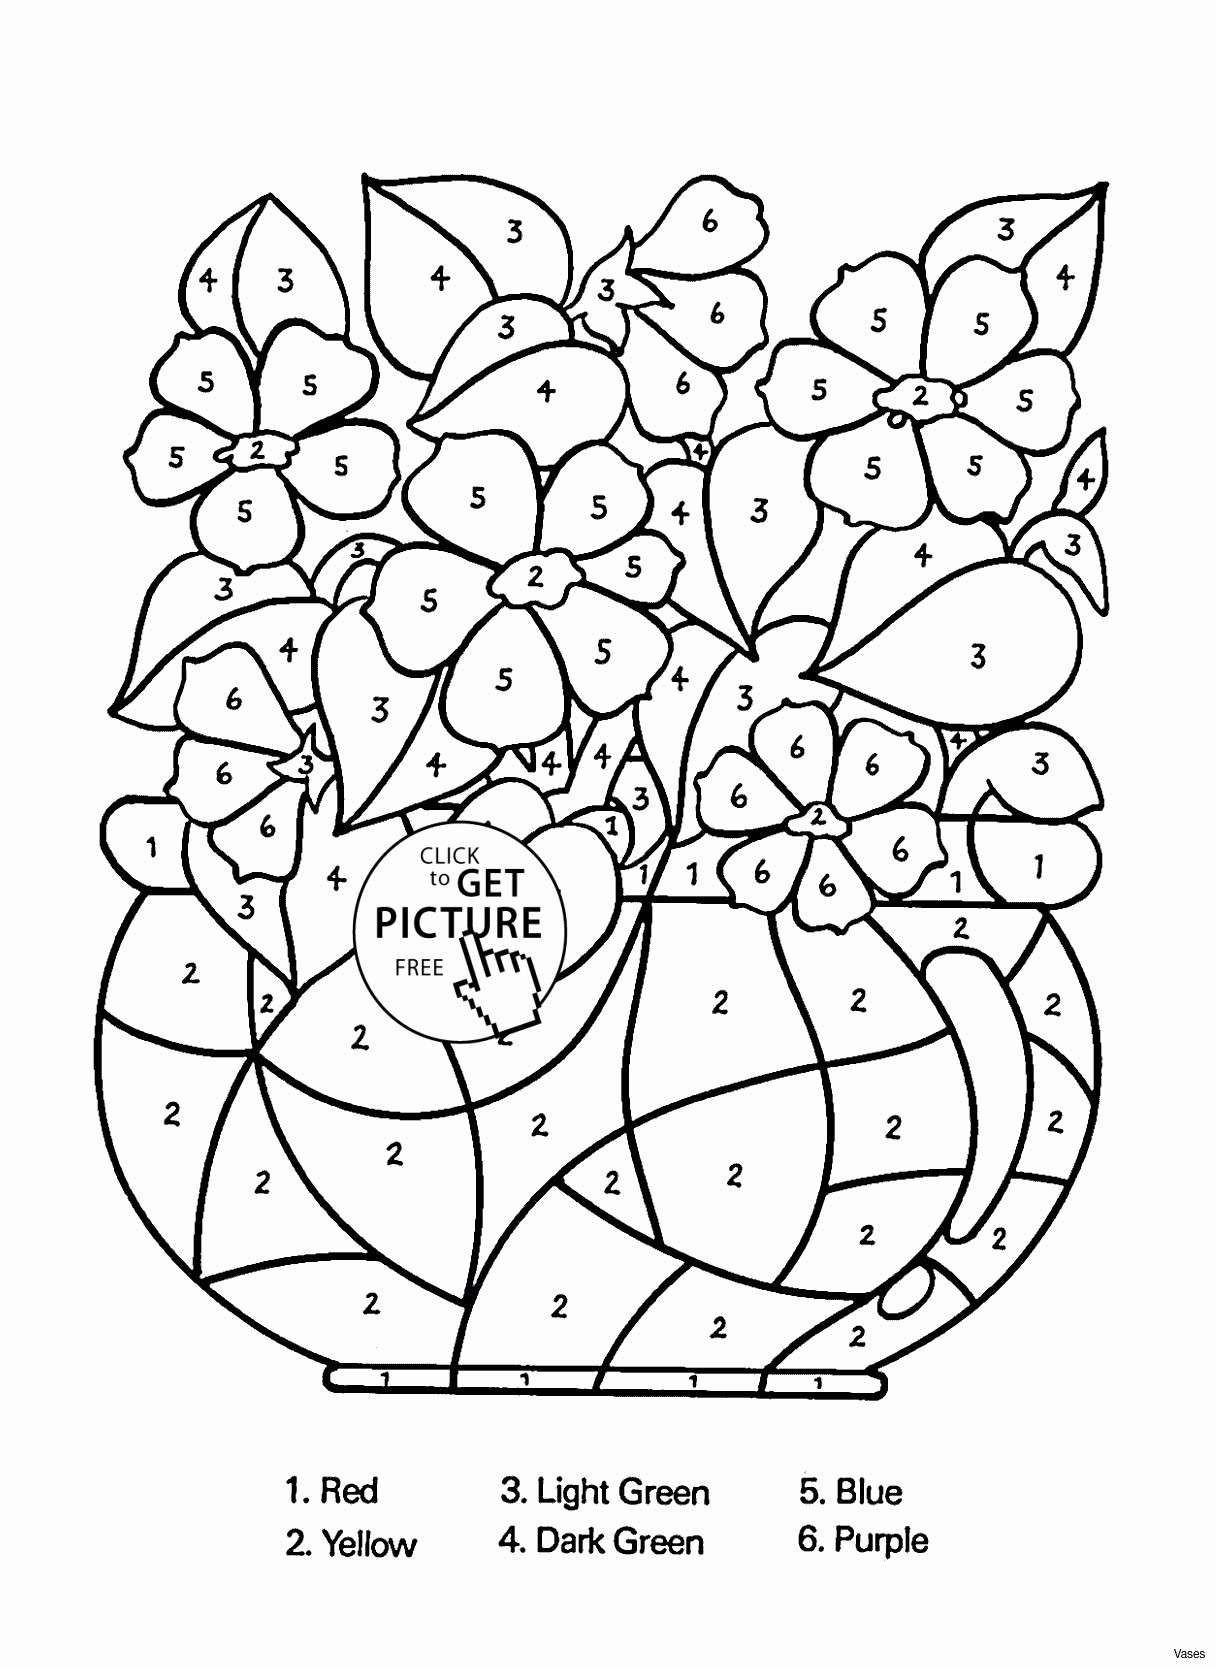 white vase with holes of white glass vase elegant vases flower vase coloring page pages with white glass vase elegant vases flower vase coloring page pages flowers in a top i 0d